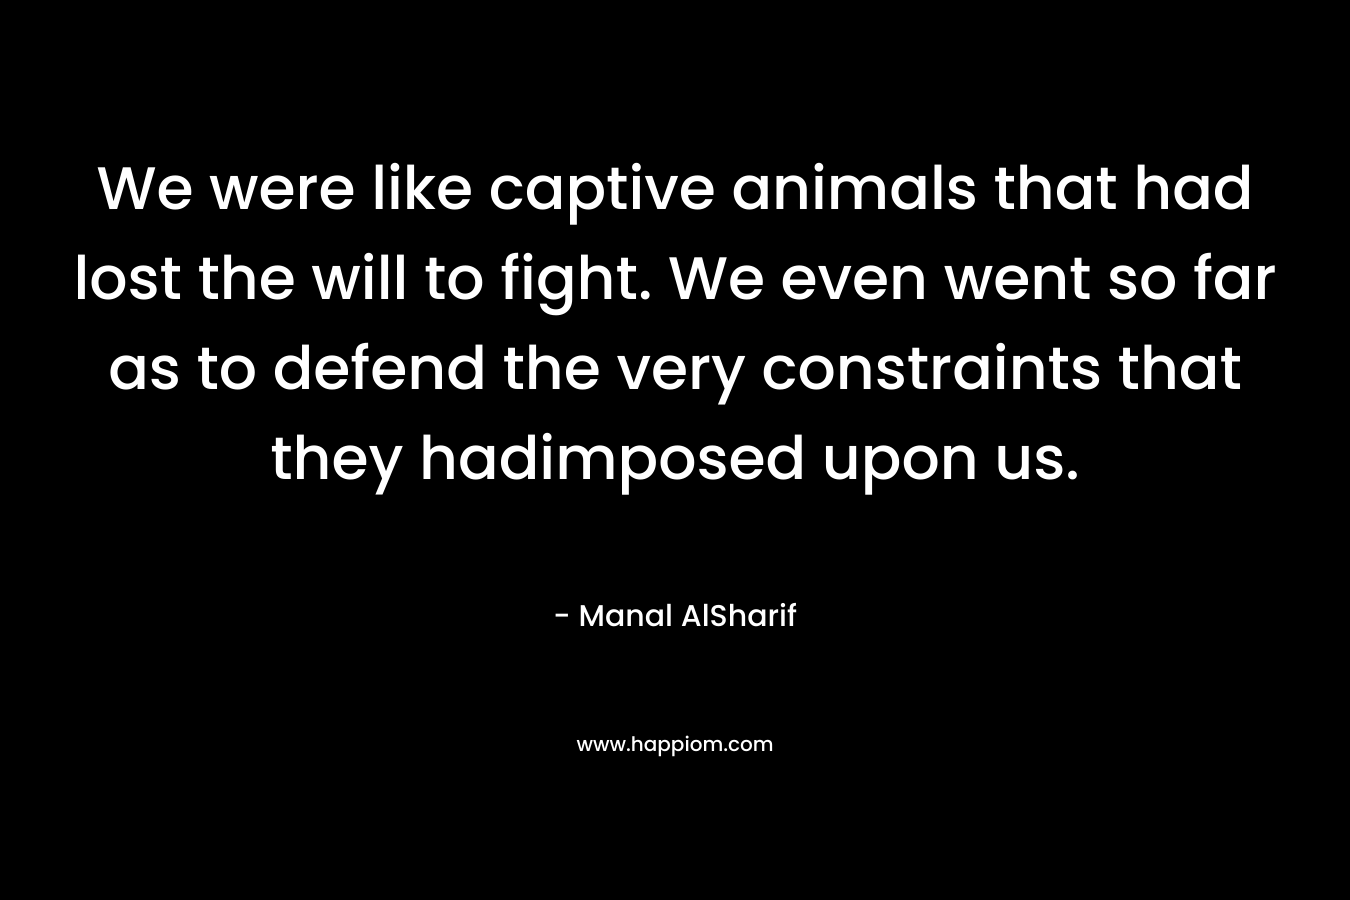 We were like captive animals that had lost the will to fight. We even went so far as to defend the very constraints that they hadimposed upon us. – Manal AlSharif